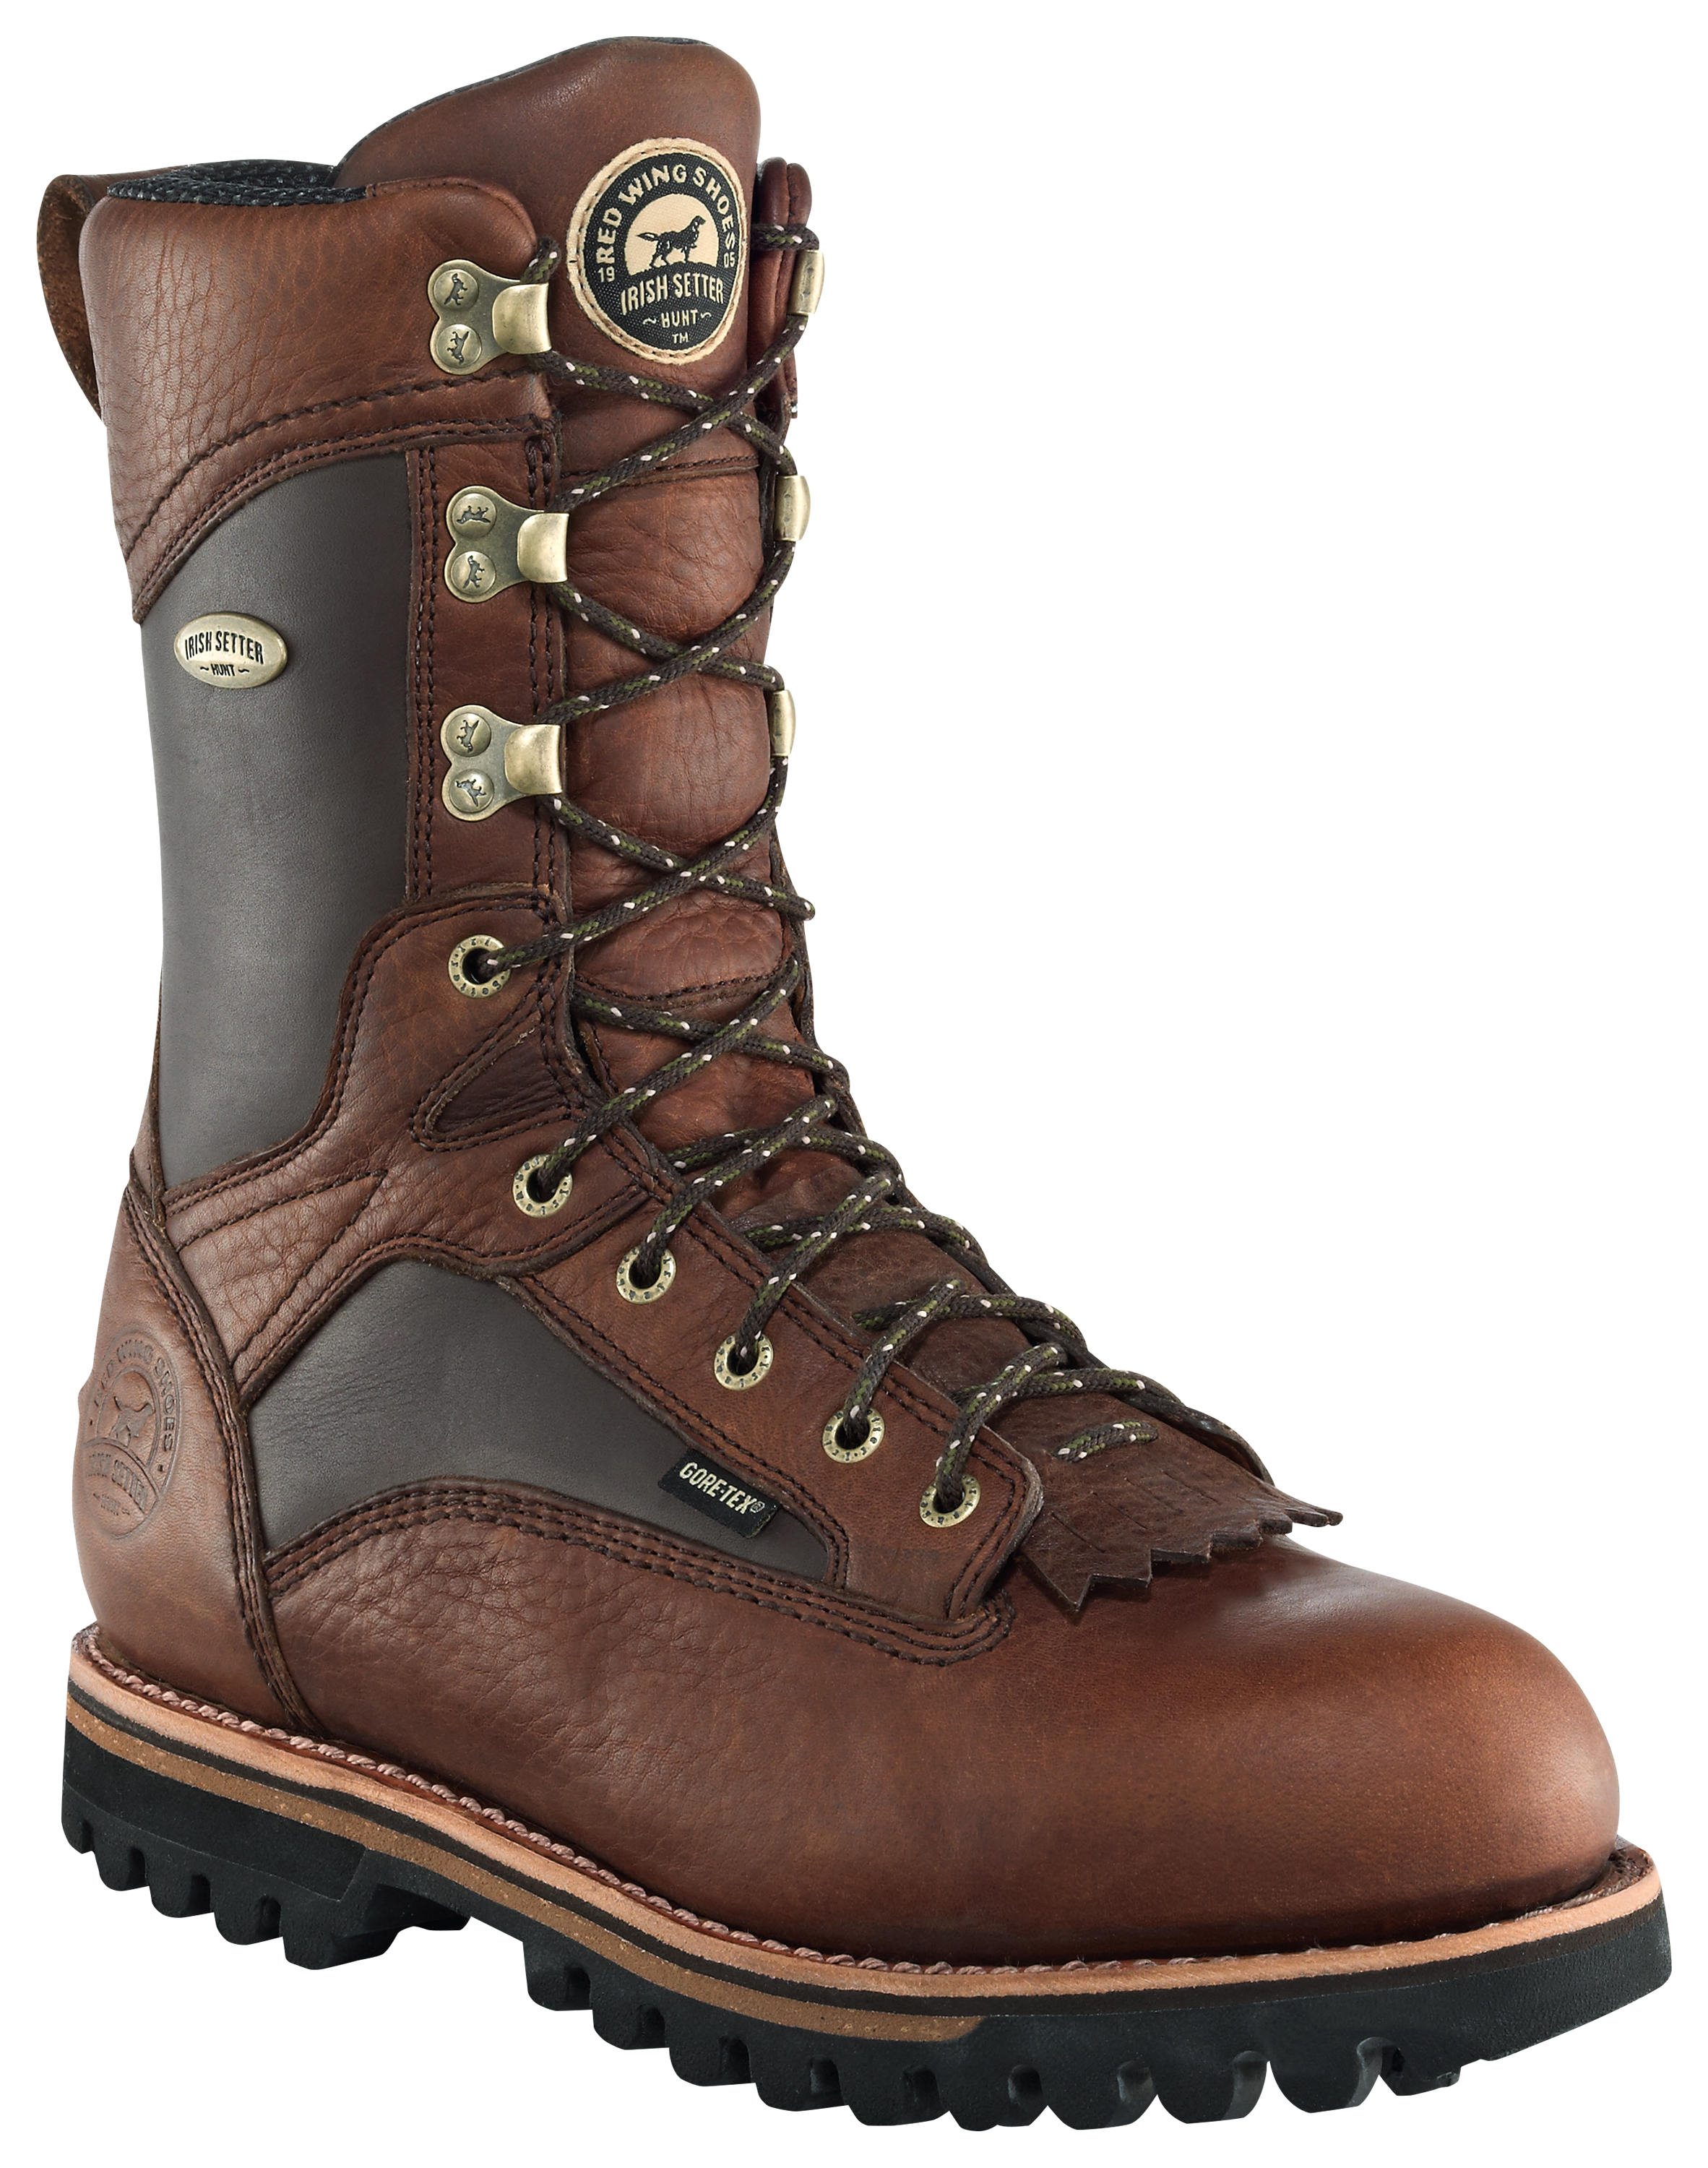 Irish Setter Elk Tracker 12'' 600 Gram Thinsulate Insulated Waterproof Hunting Boots for Men - Brown - 16 Wide EE